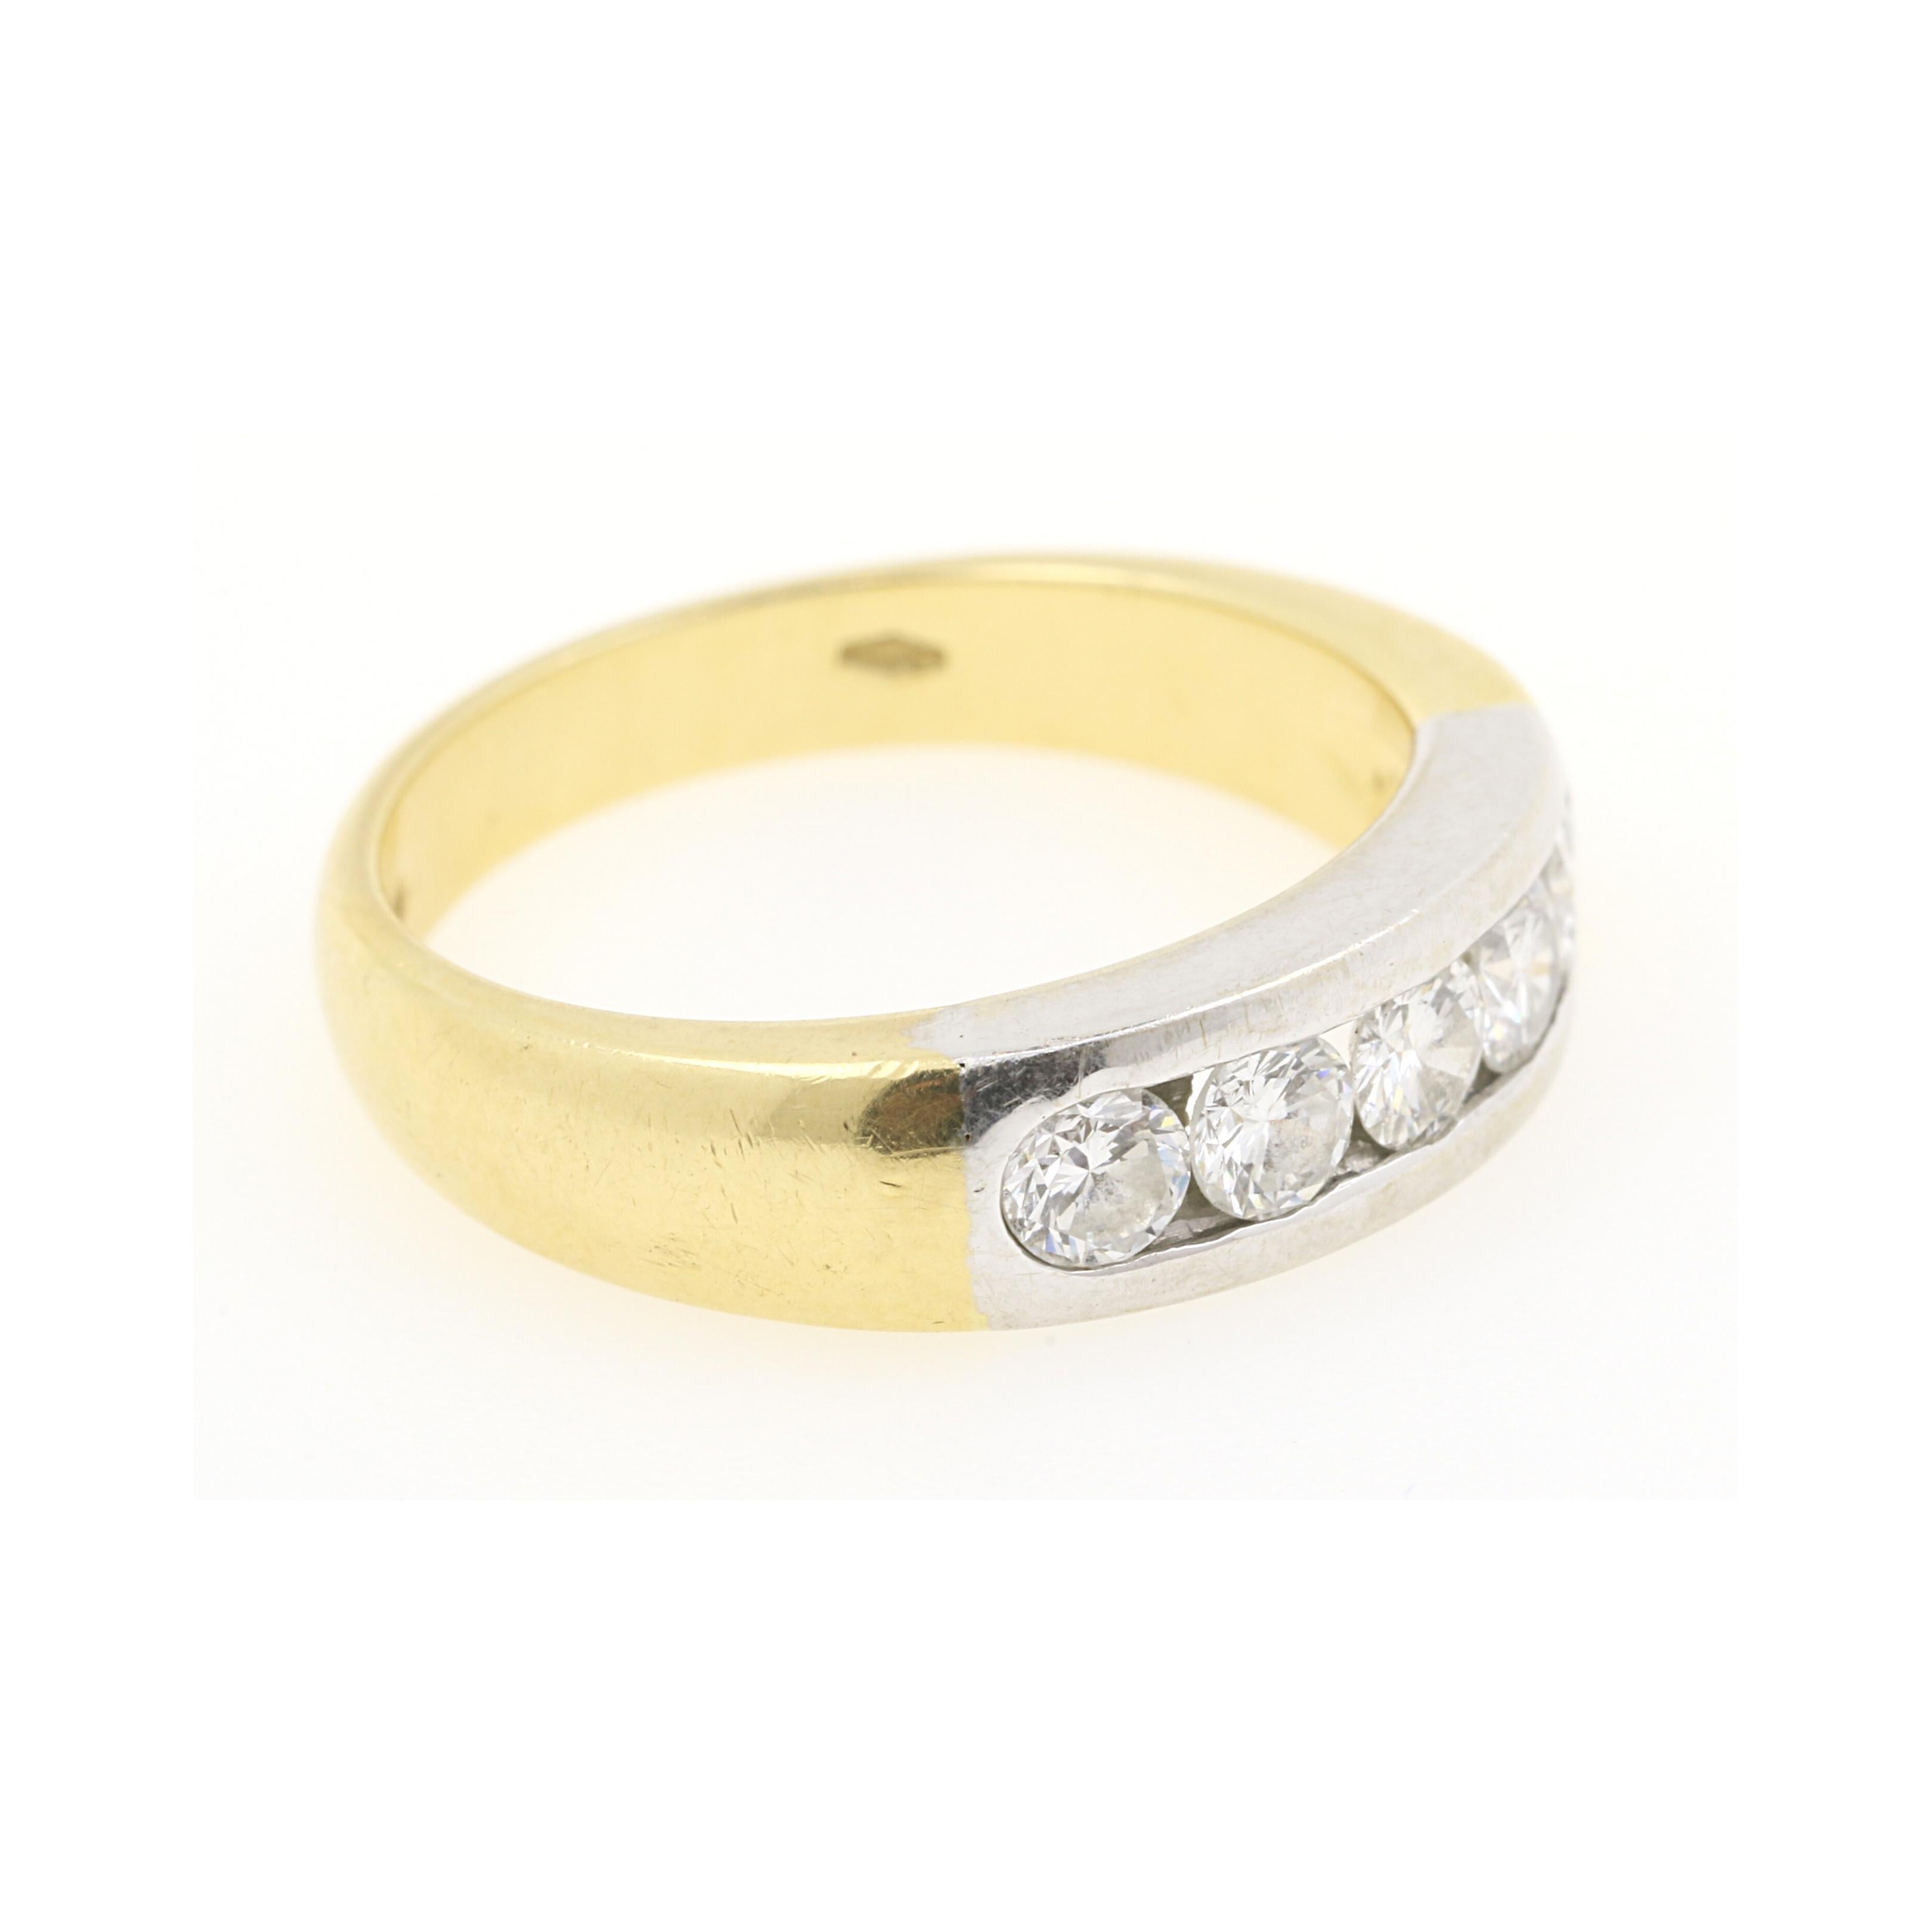 Get your bridal Ring from romantic Italy and start the most beautiful journey!
18k Yellow Gold Bridal diamonds ring. This piece is sold with is certificate (released in English by AIG Laboratories in Milano n: J5130015116). 750 Stamp. Made in Italy.